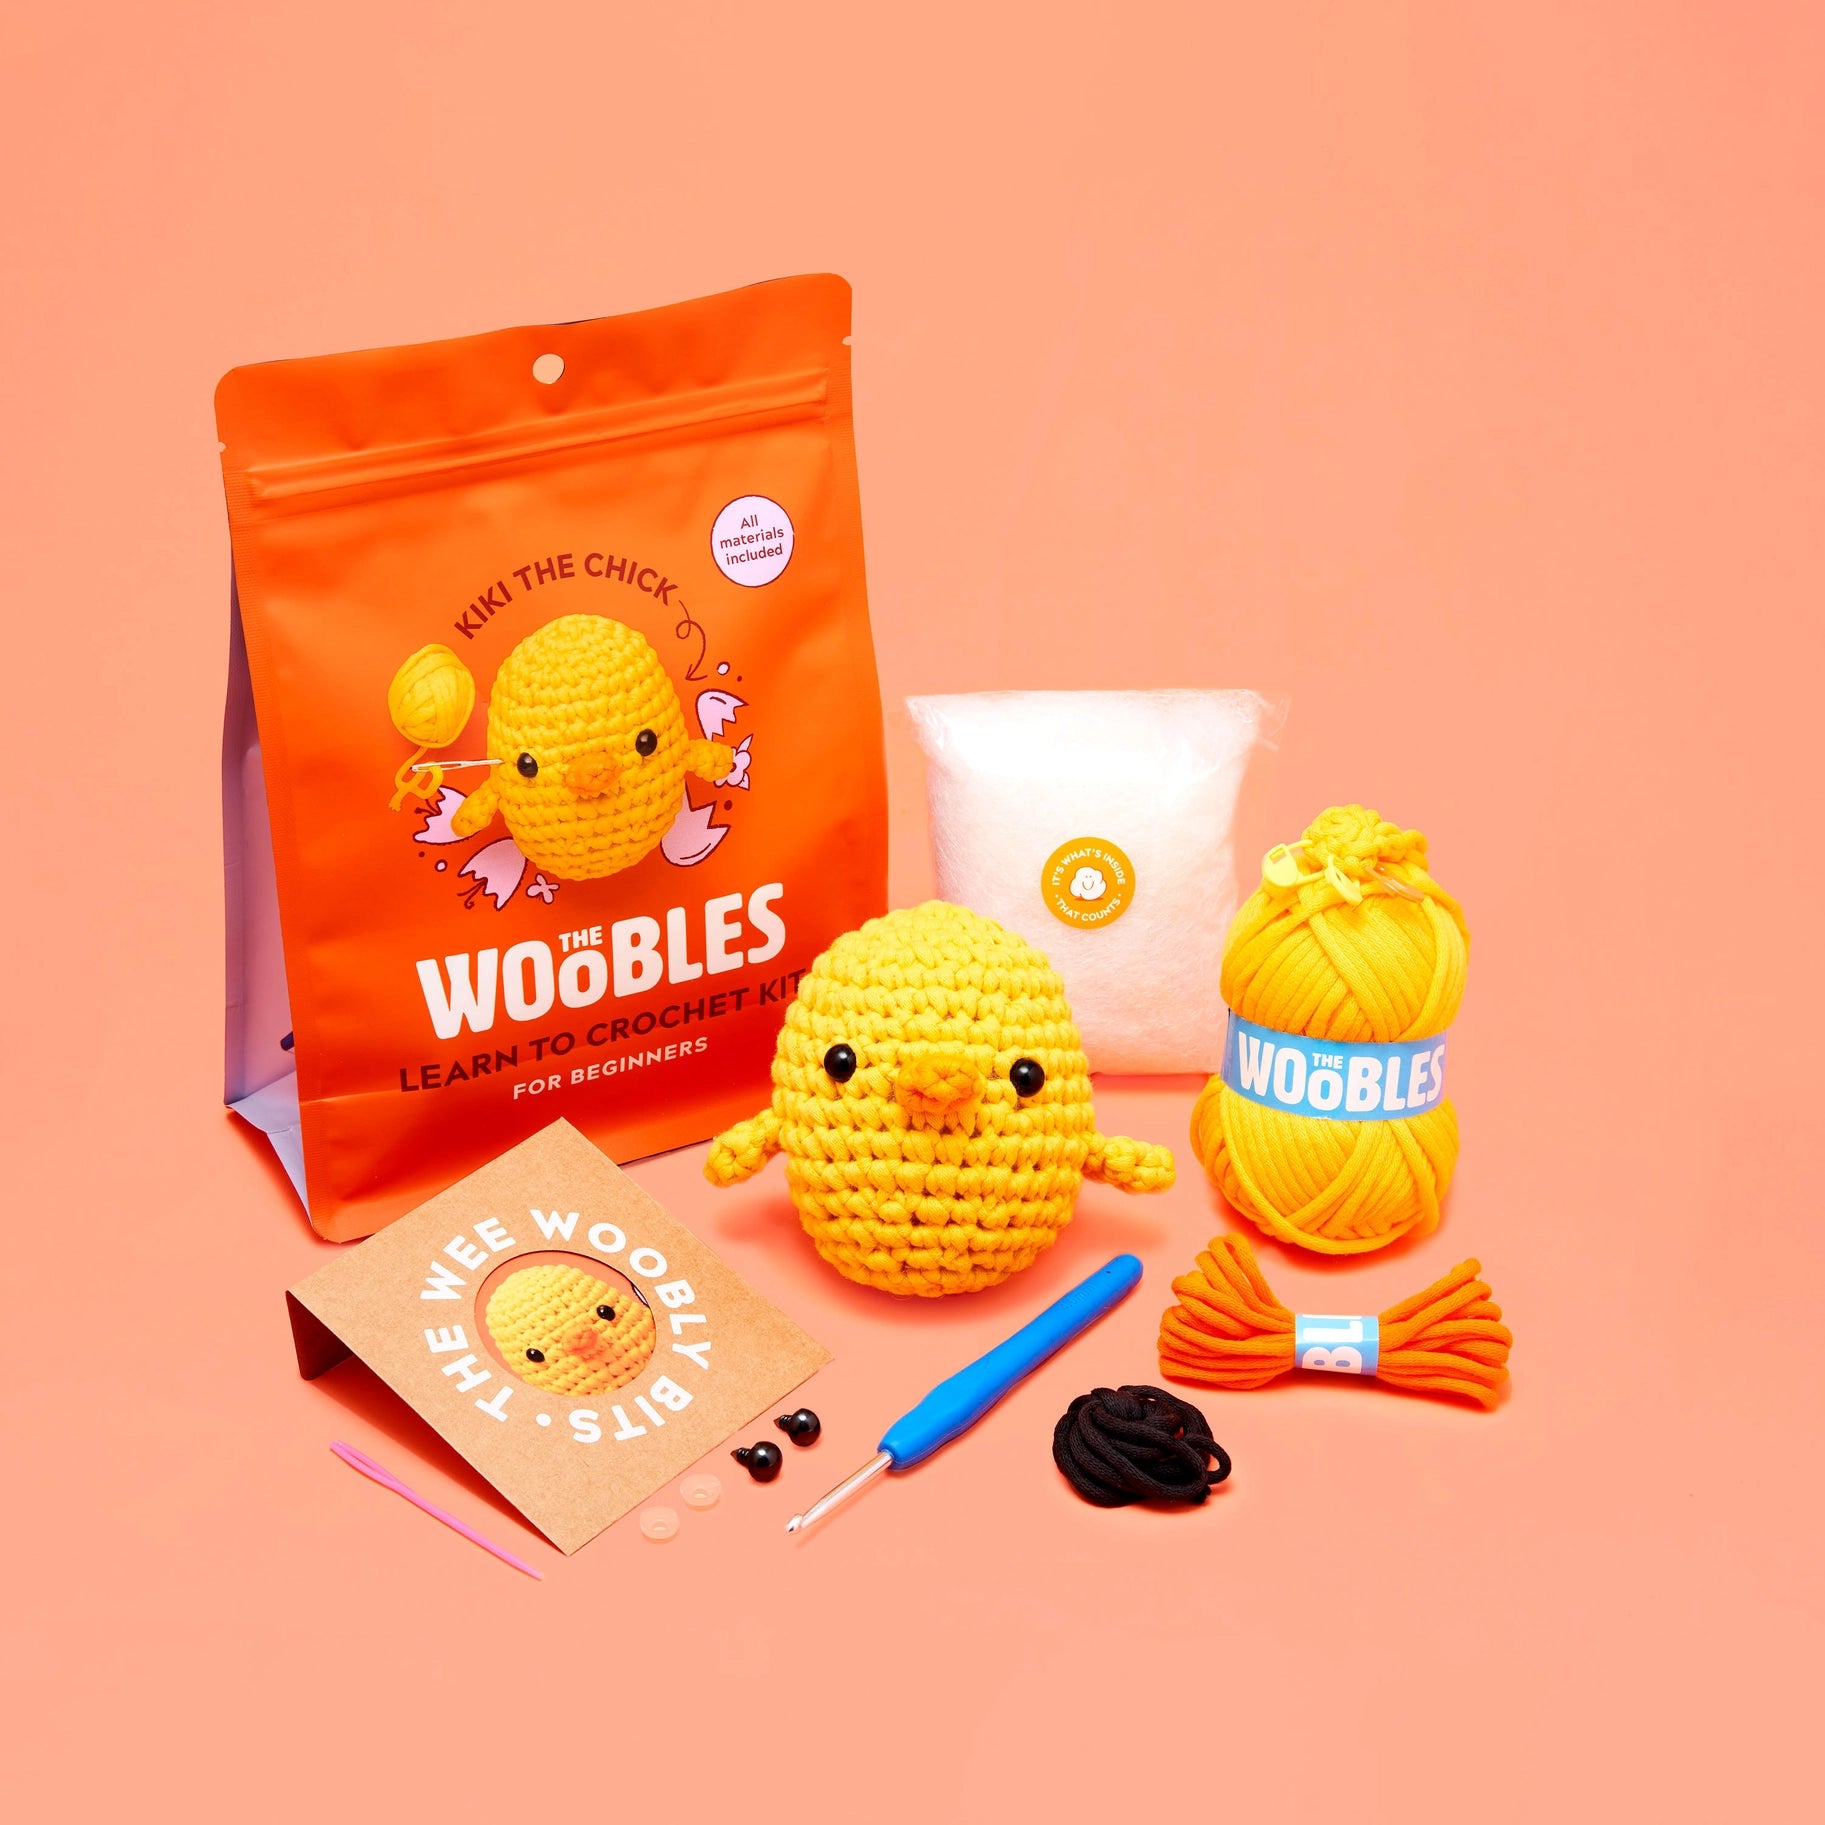 Woobles Learn to Crochet Kit Kiki the Chick